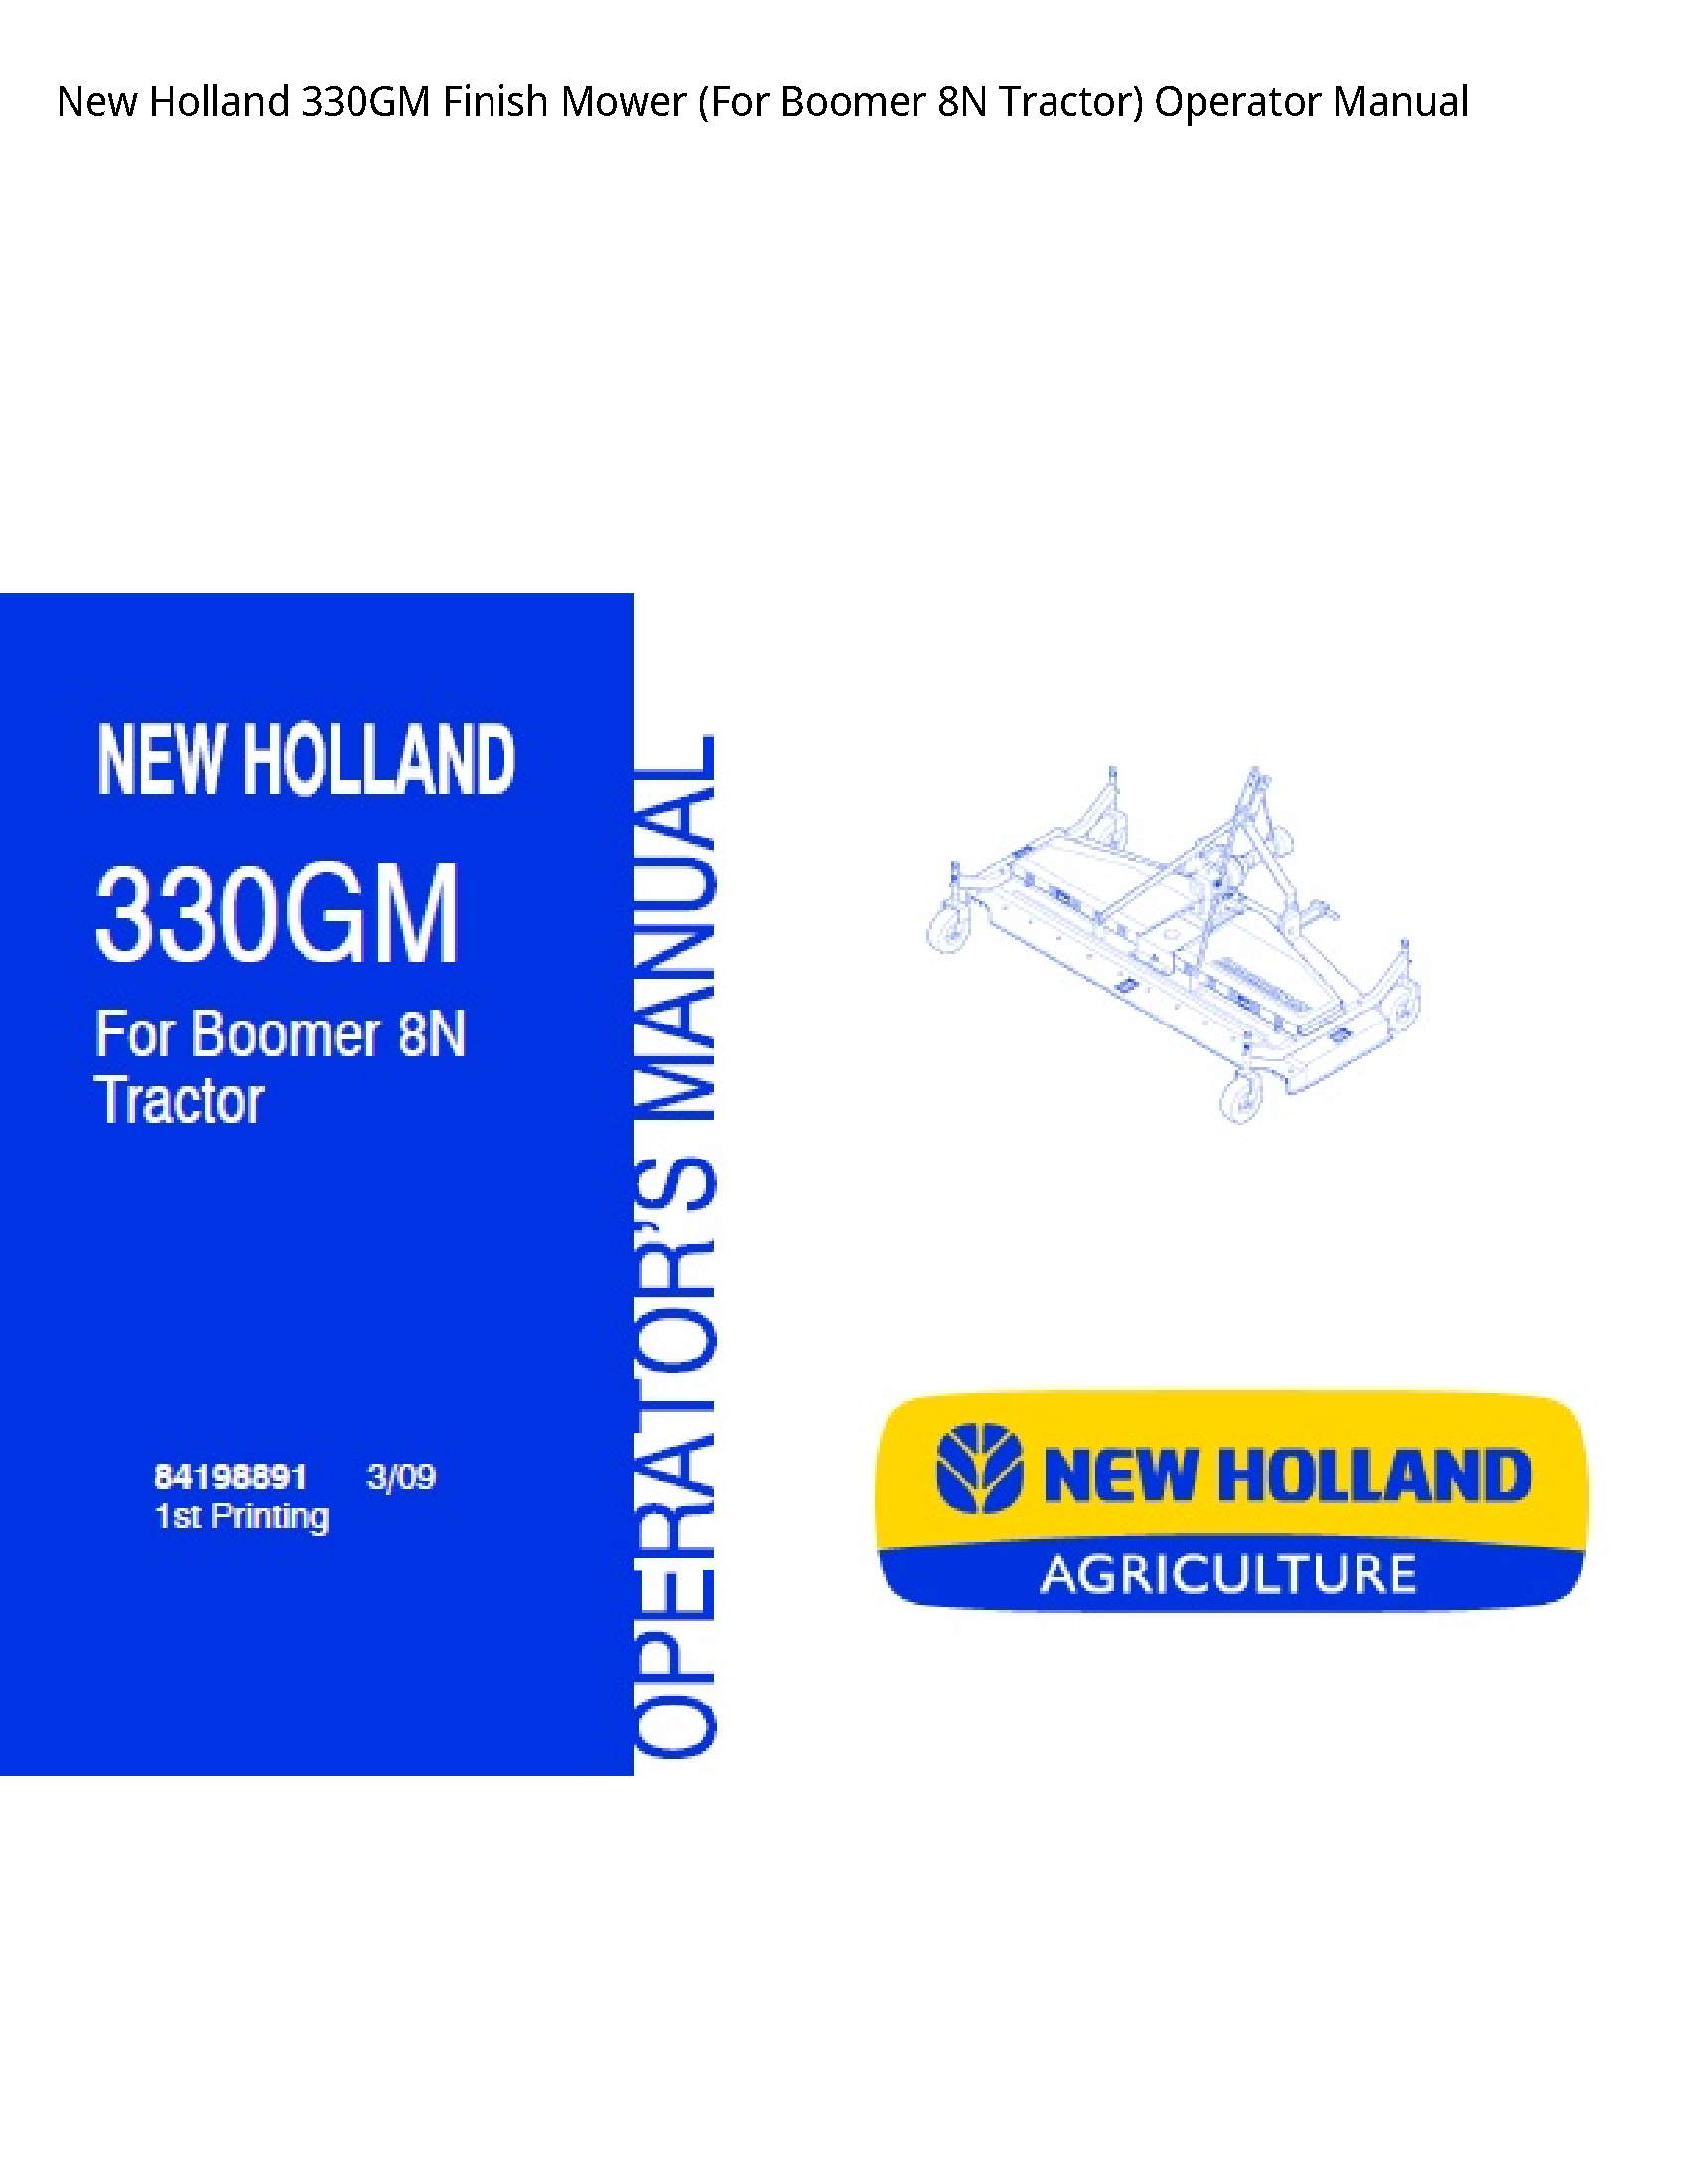 New Holland 330GM Finish Mower (For Boomer Tractor) Operator manual